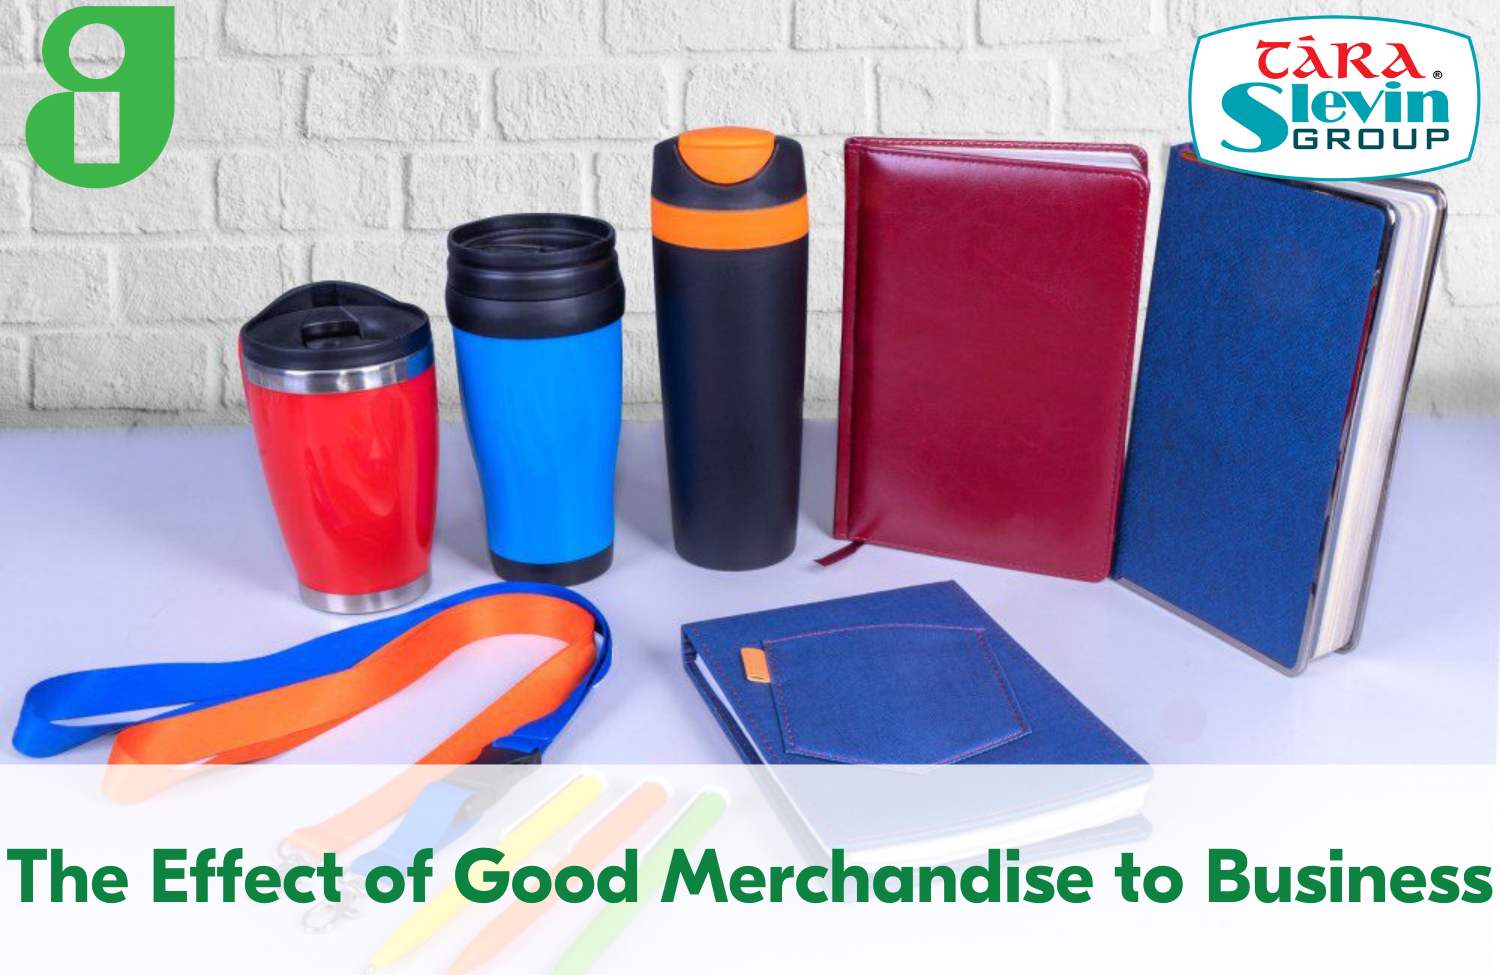 The Effect of Good Merchandise on Any Business